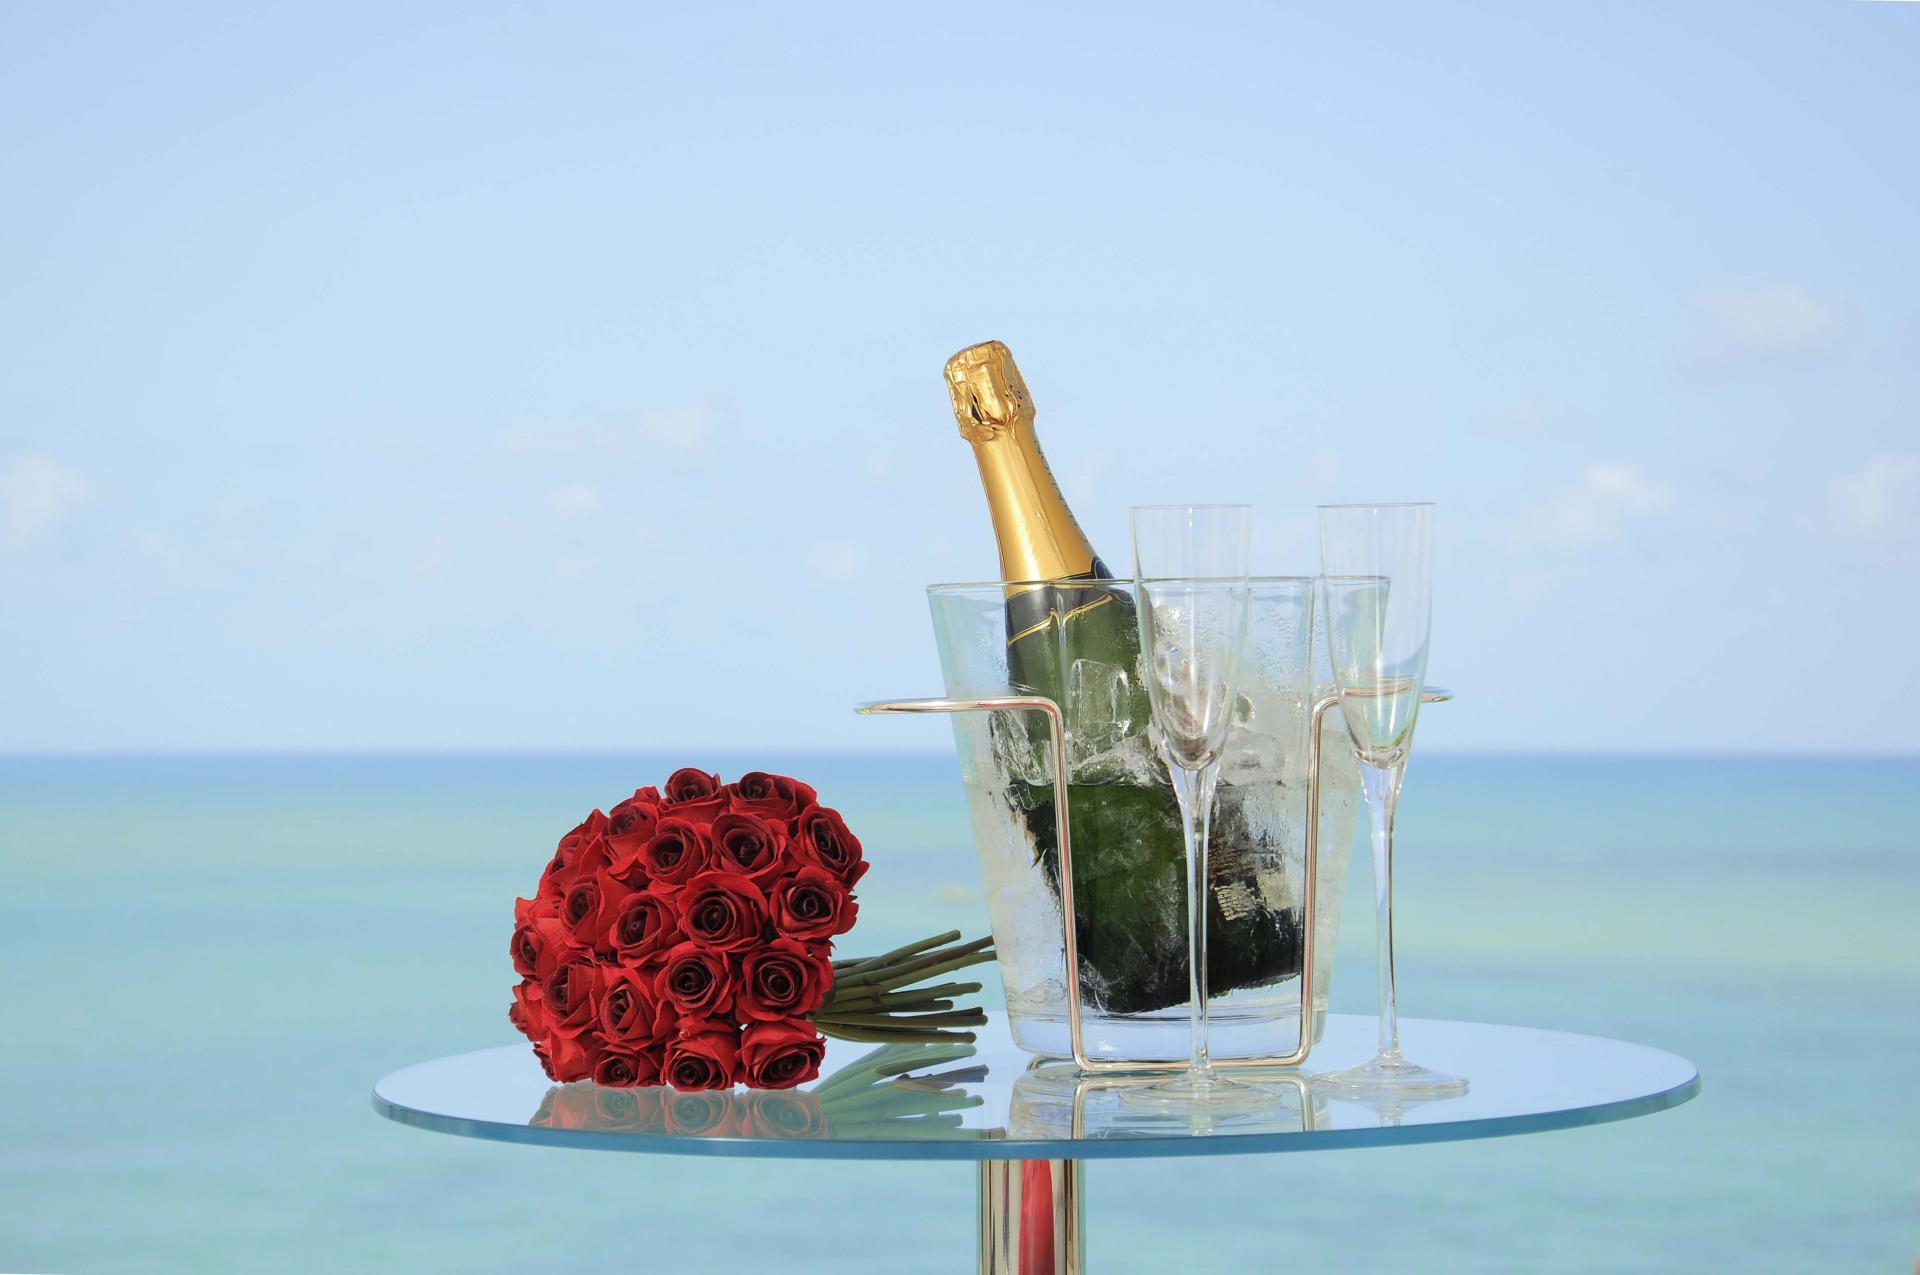 After a wedding in Brazil: Champagne and roses on the beach.